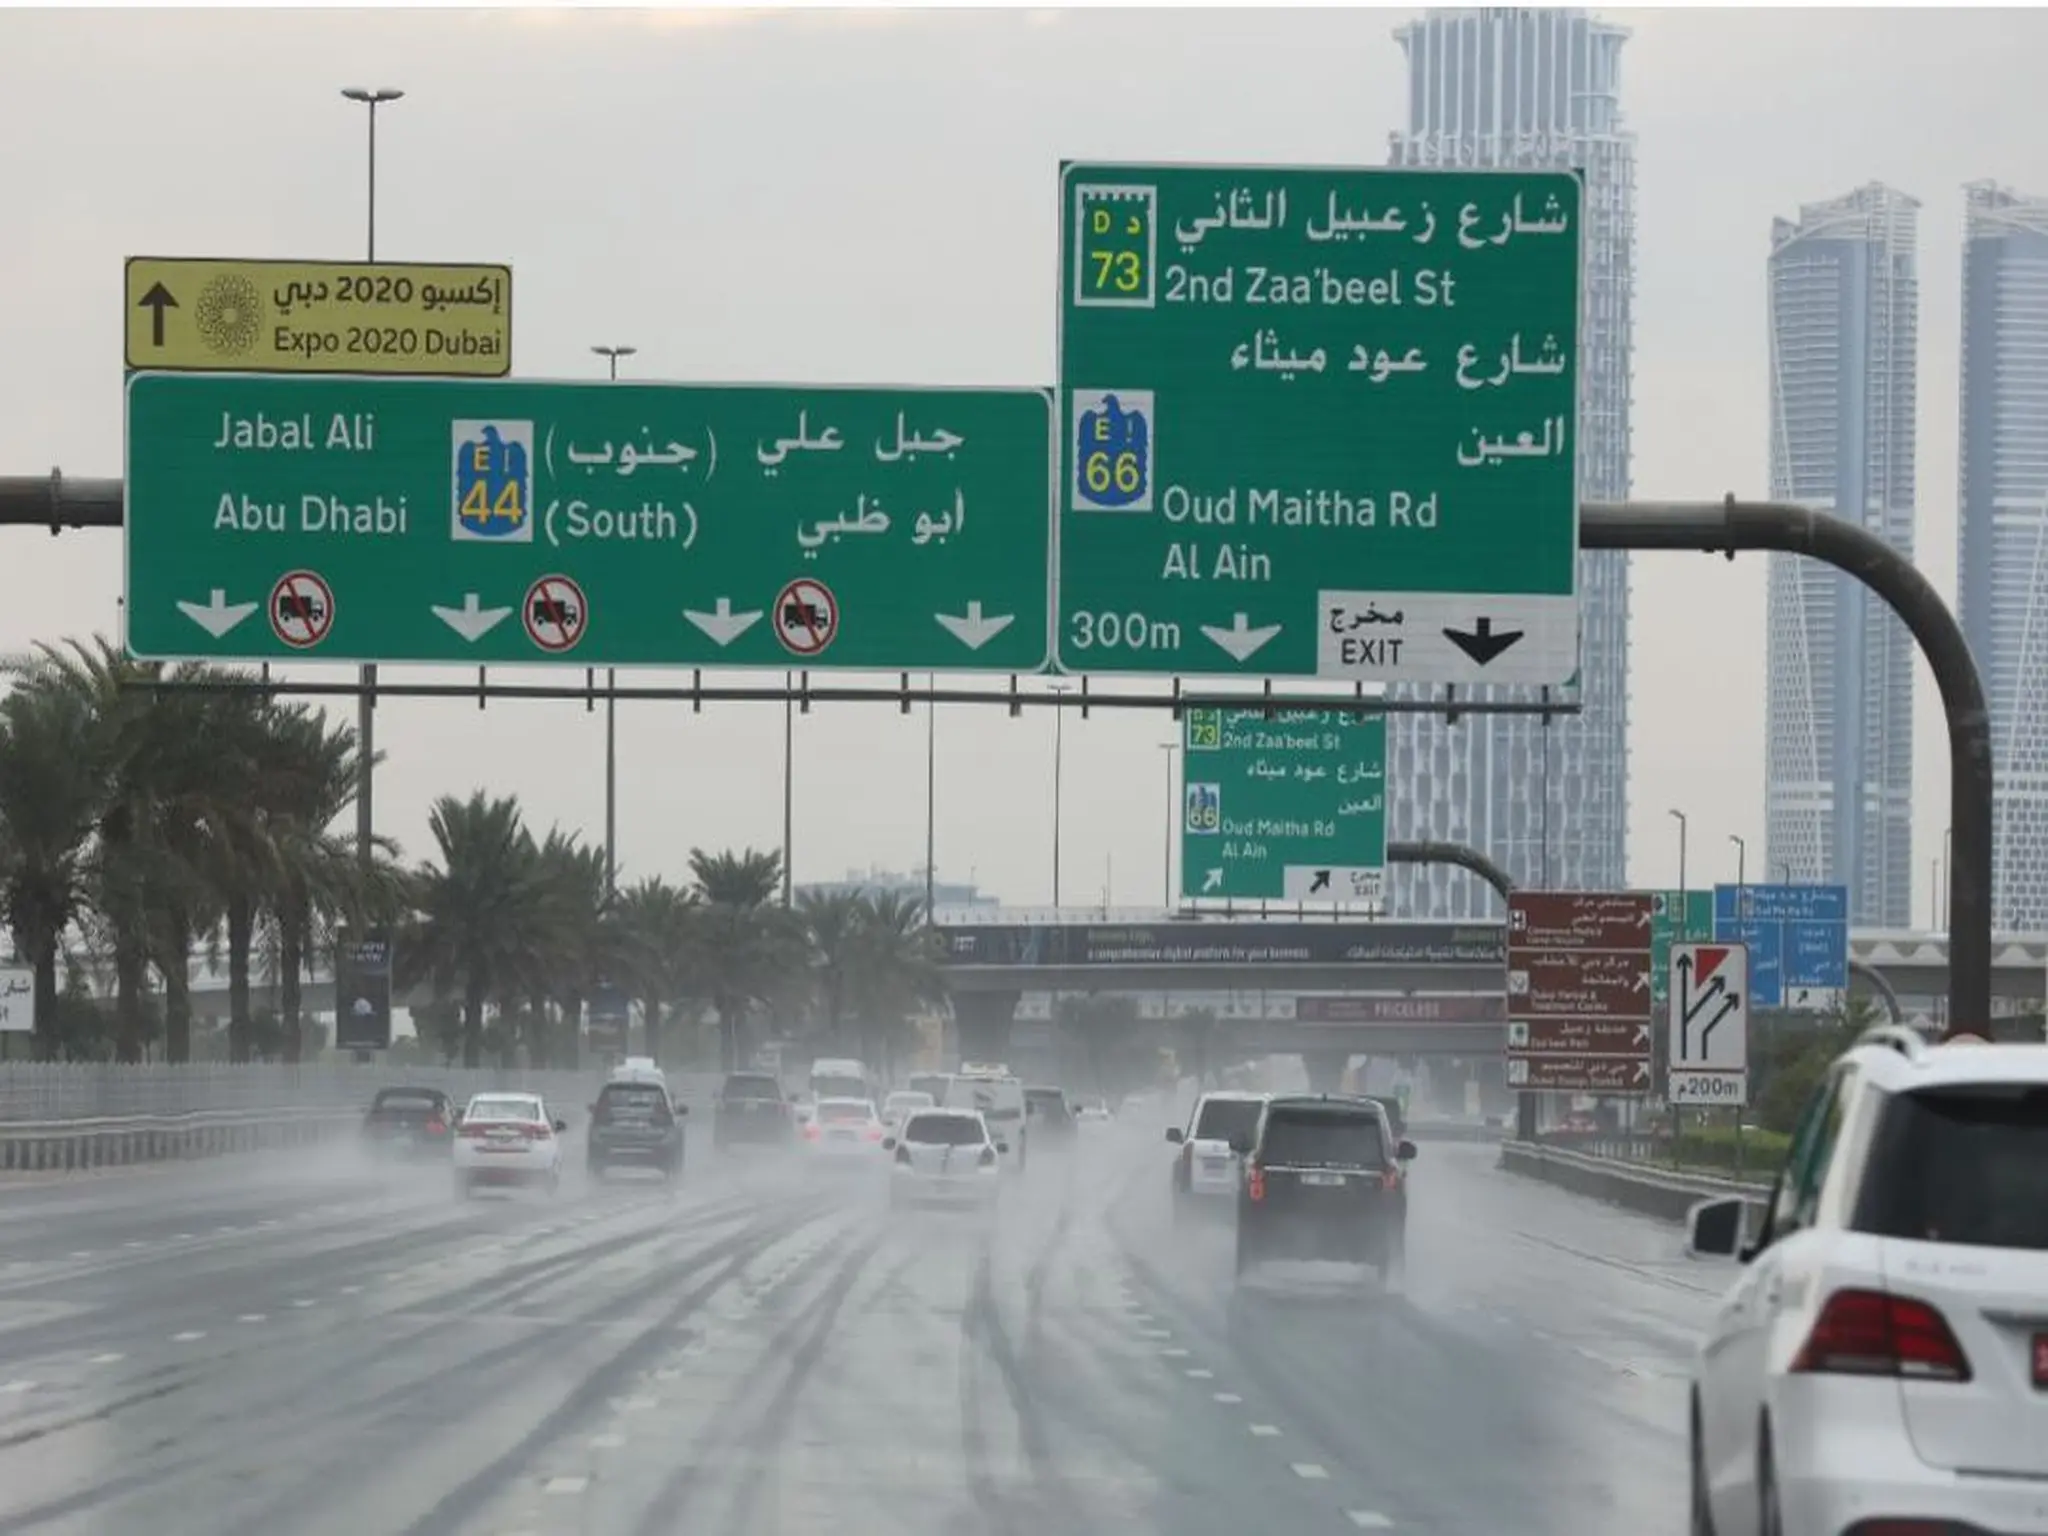 UAE Meteorology announces heavy rains and the closure of some roads due to bad weather conditions